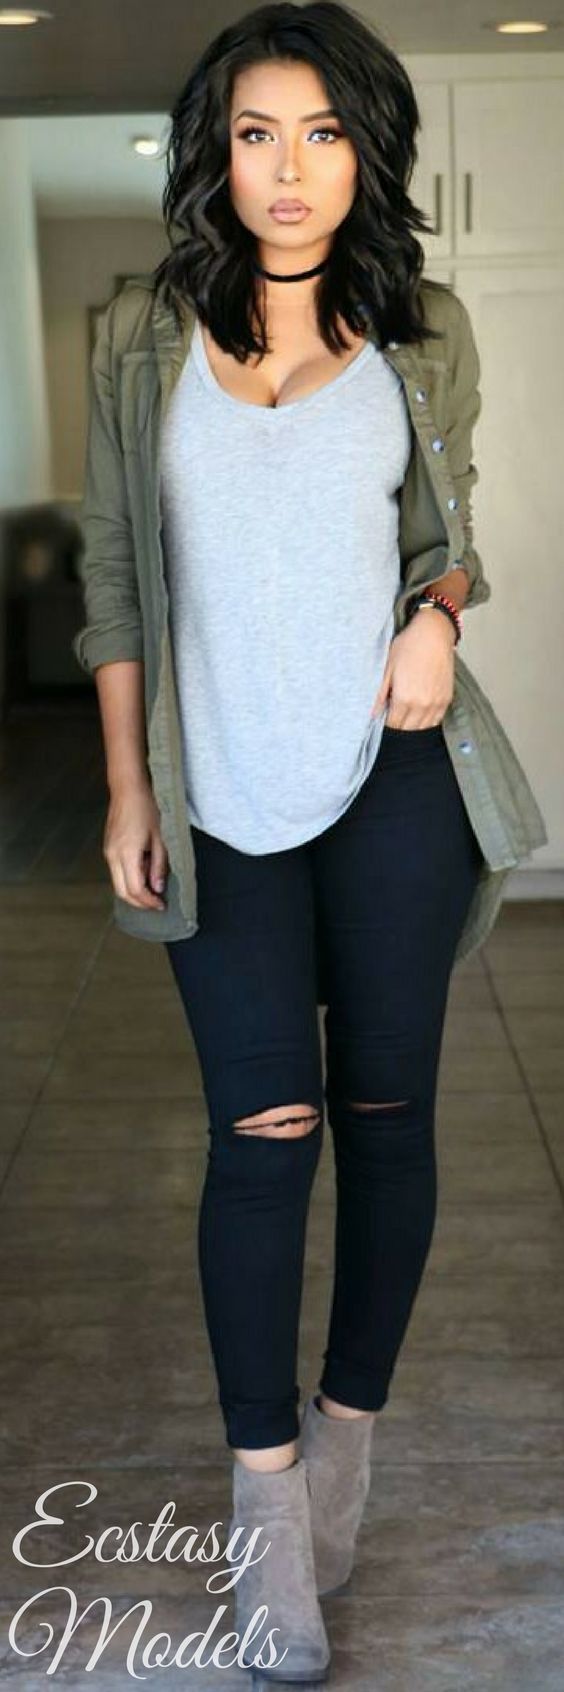 High waisted jeans outfit: Ripped Jeans,  Casual Winter Outfit,  Slim-Fit Pants,  Boot Outfits,  Mom jeans  